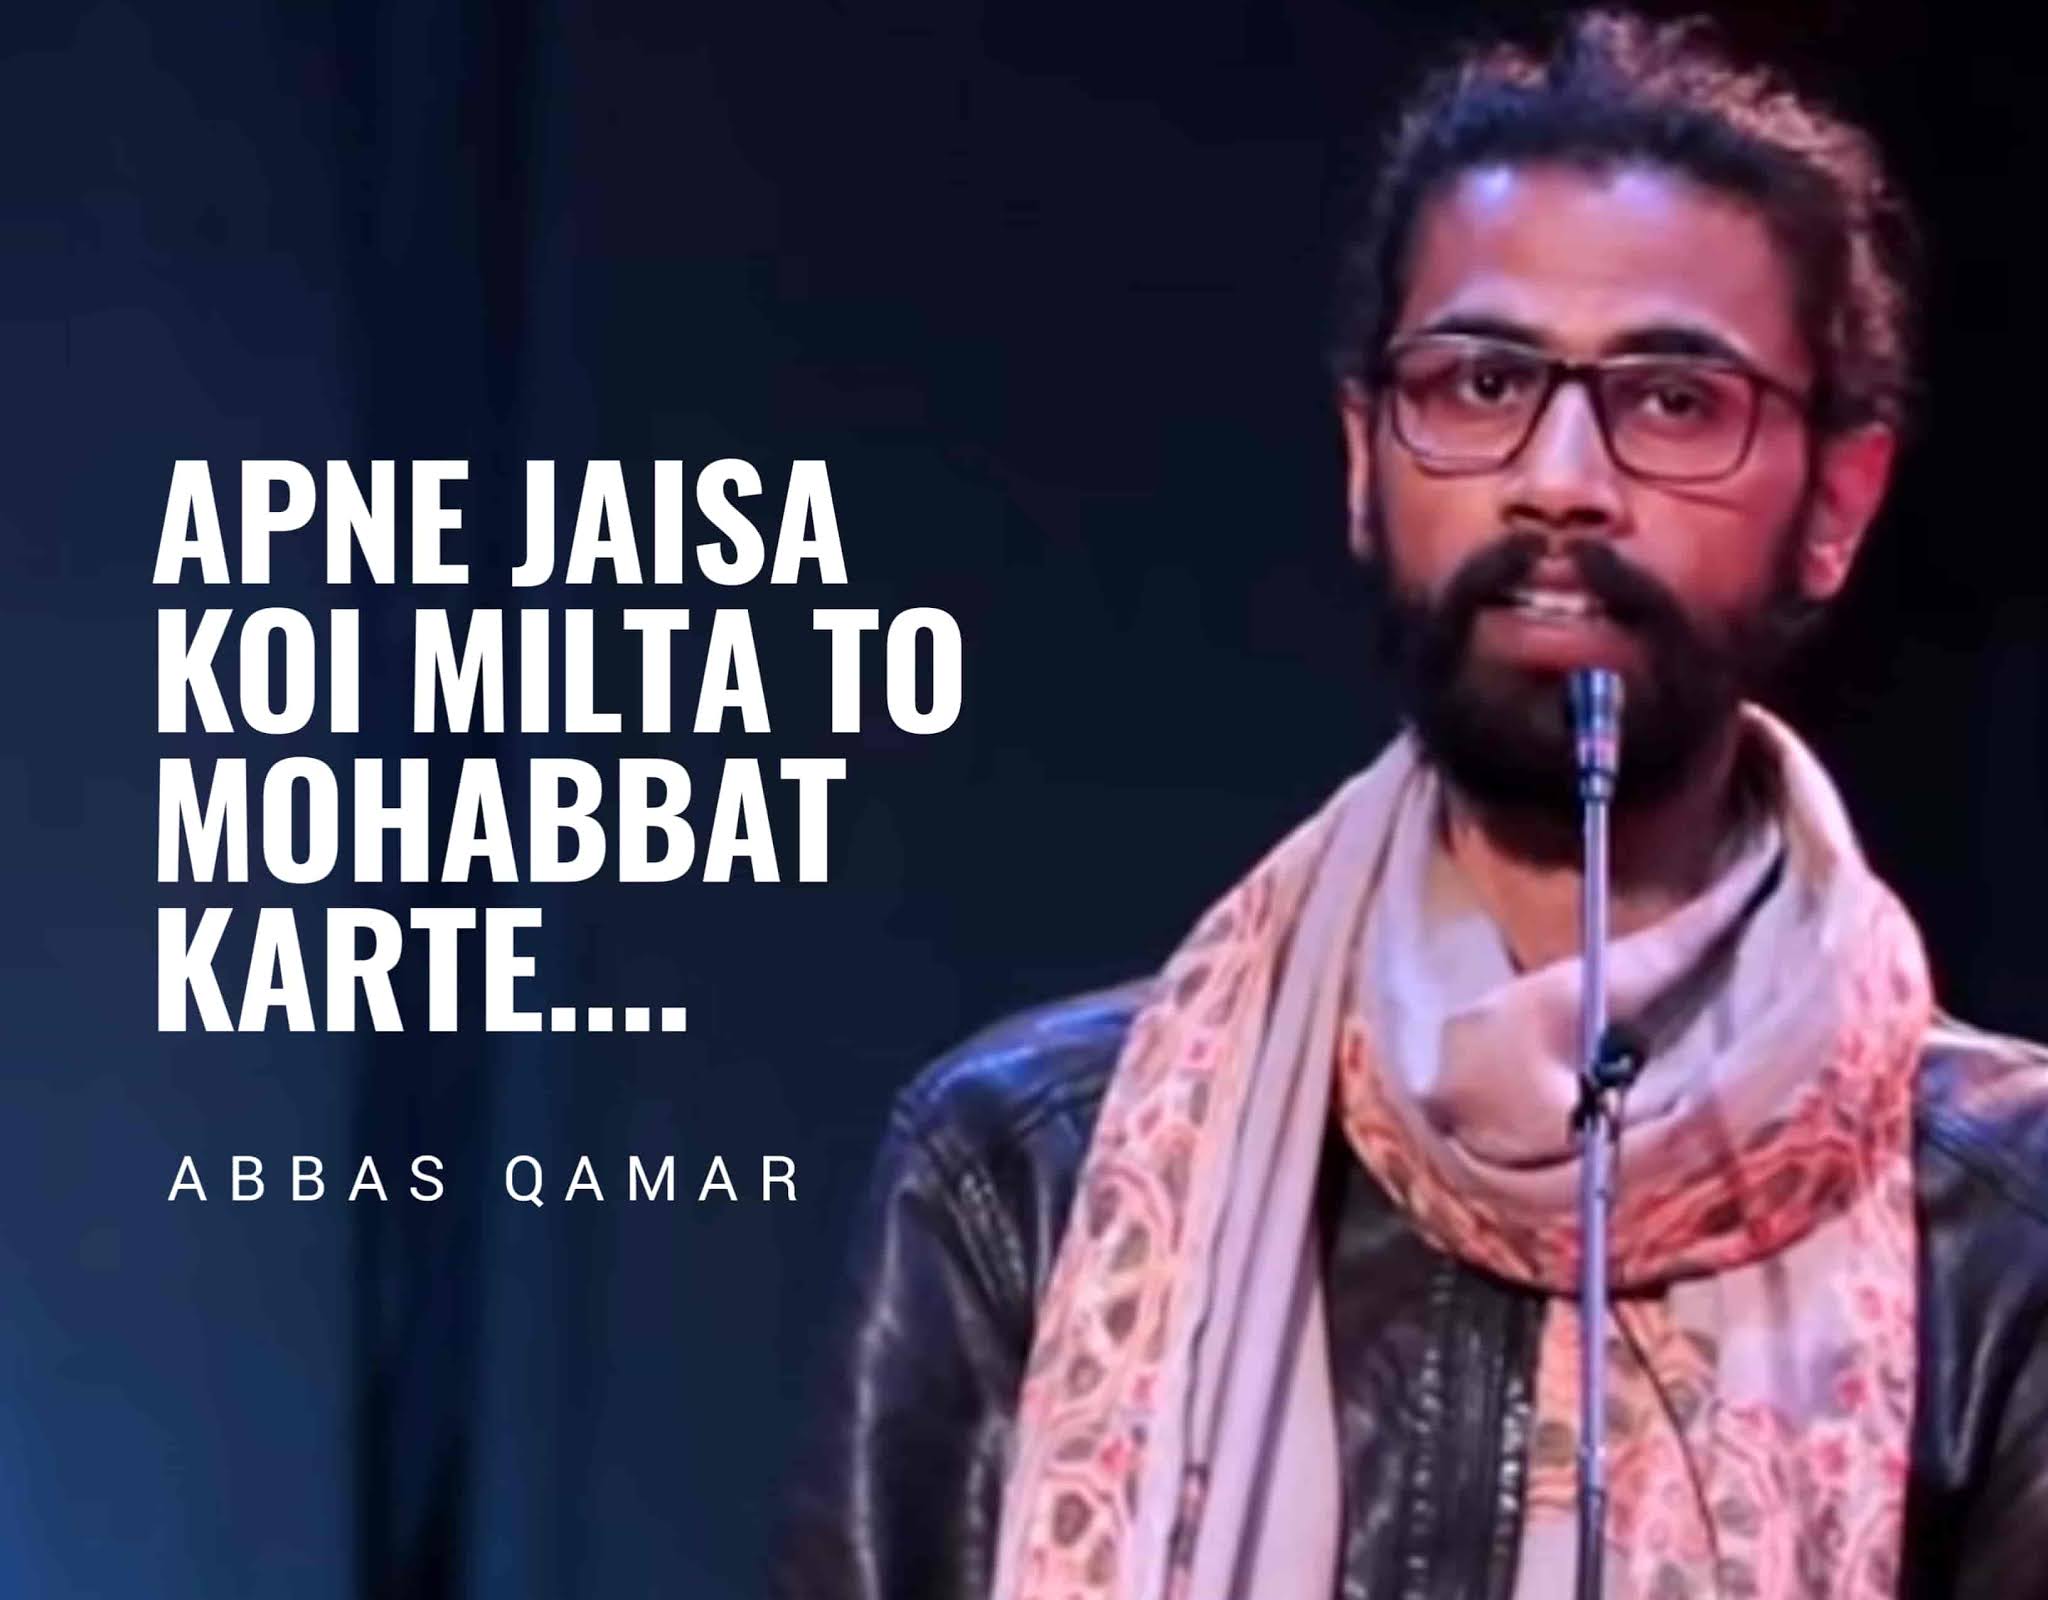 A Beautiful Shayari "Apne Jaisa Koi Milta To Mohabbat Karte" which is written and Performed by young generation poet Abbas Qamar on the stage of 'Jashn-e-Rekhta'.